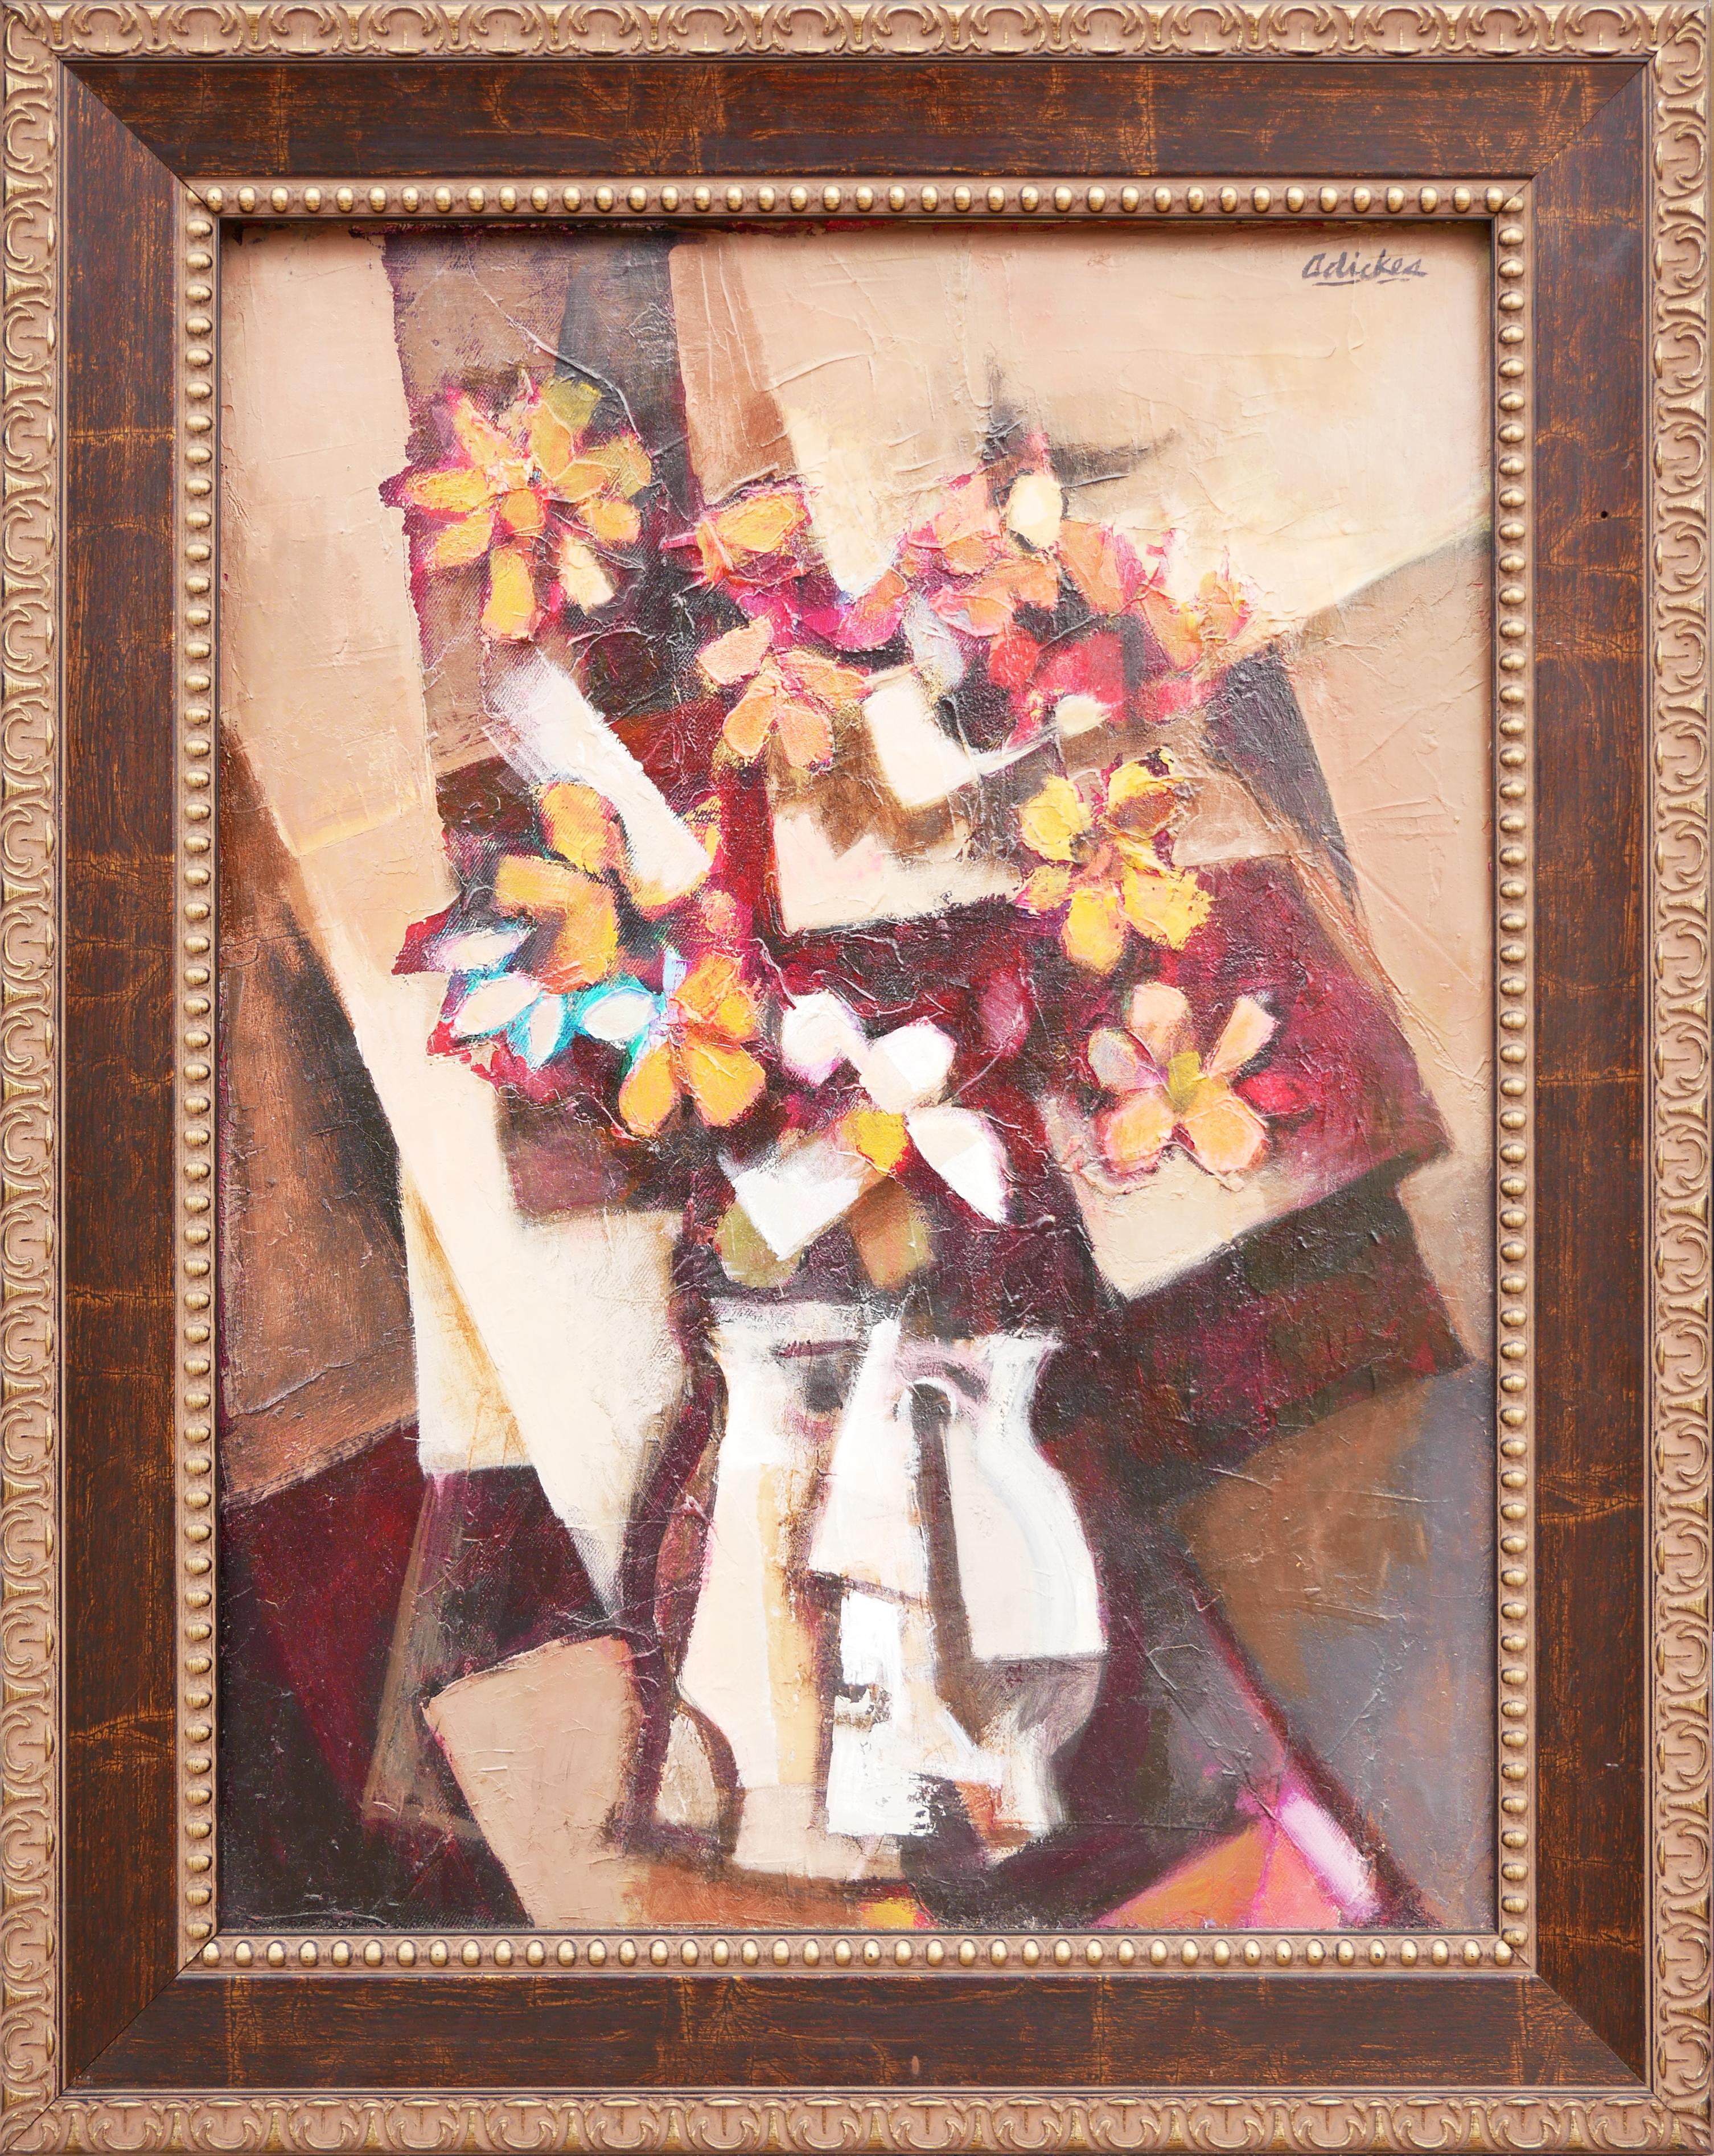 David Adickes Abstract Painting - "Cubist Bouquet, Strange Vase" Warm-Toned Abstract Cubist Floral Still Life